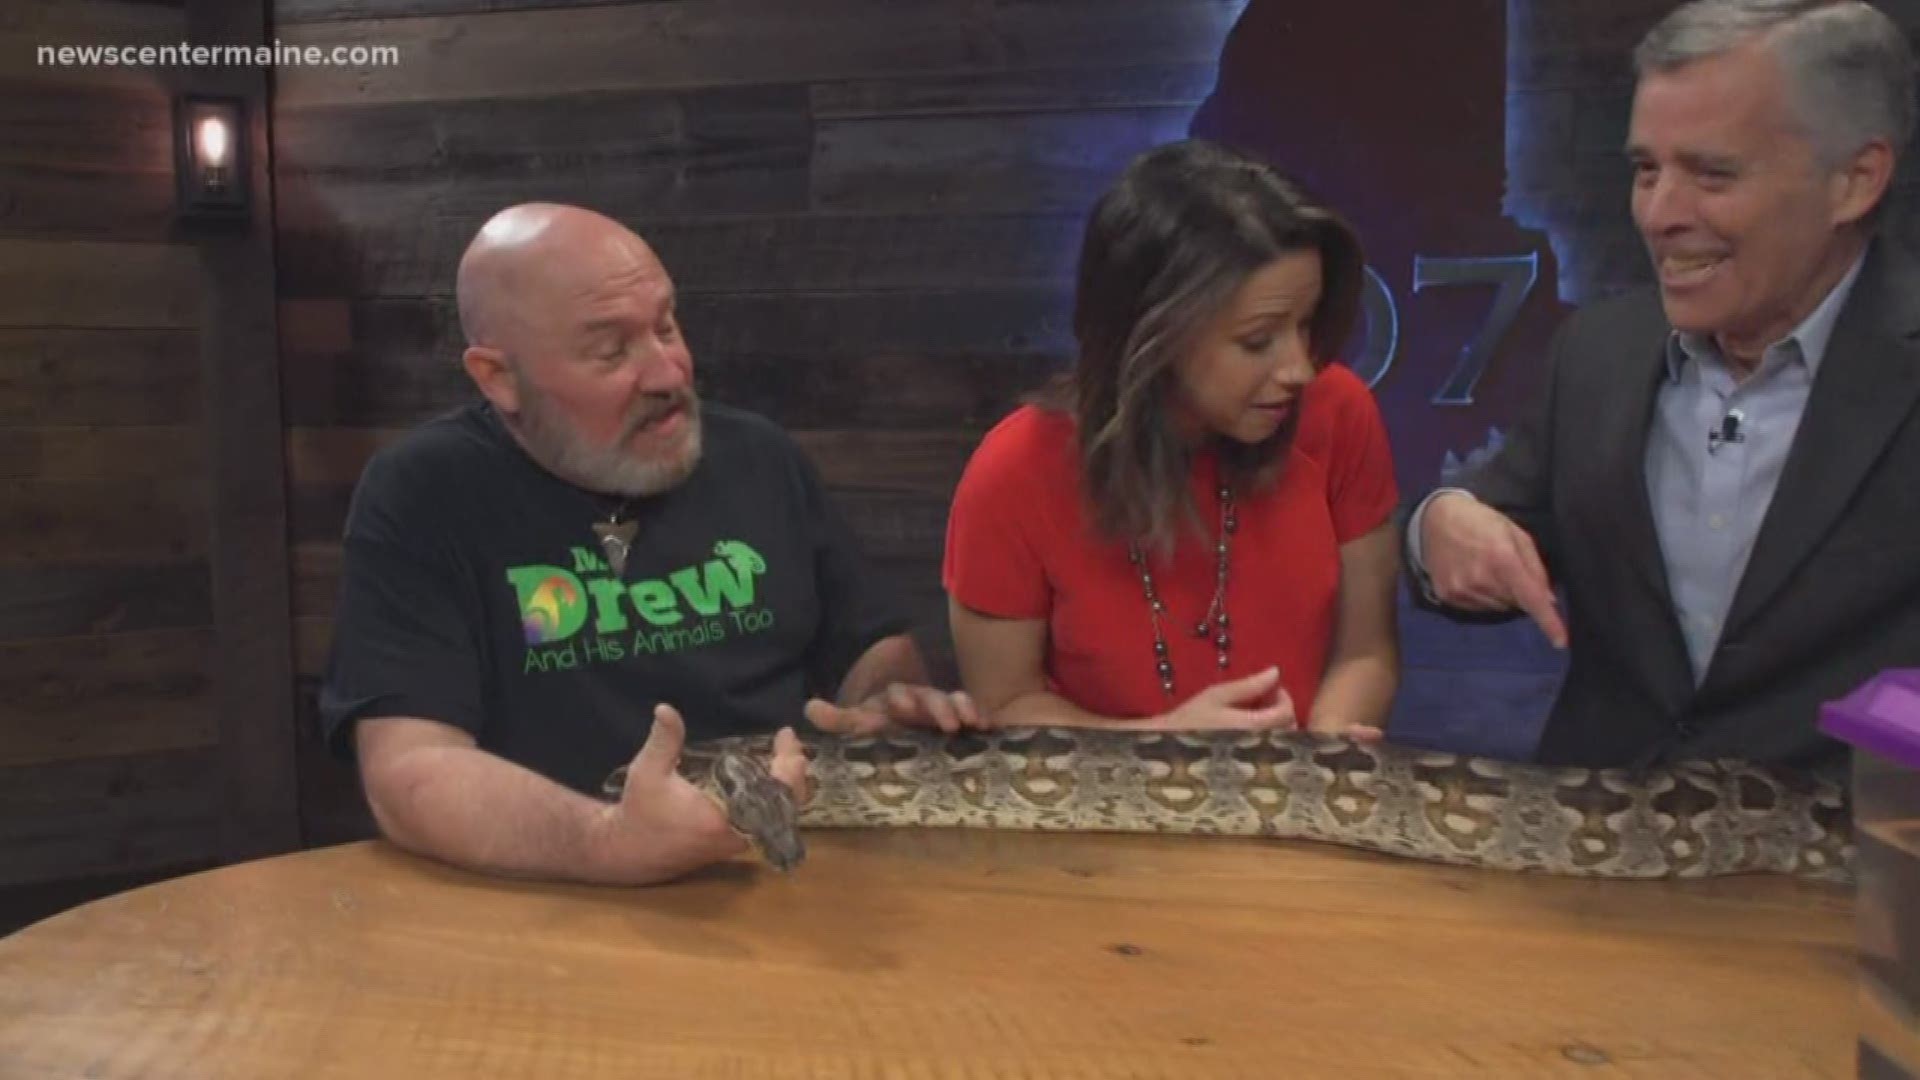 Handling a tarantula and boa constrictor—hey, they’re just part of the job.